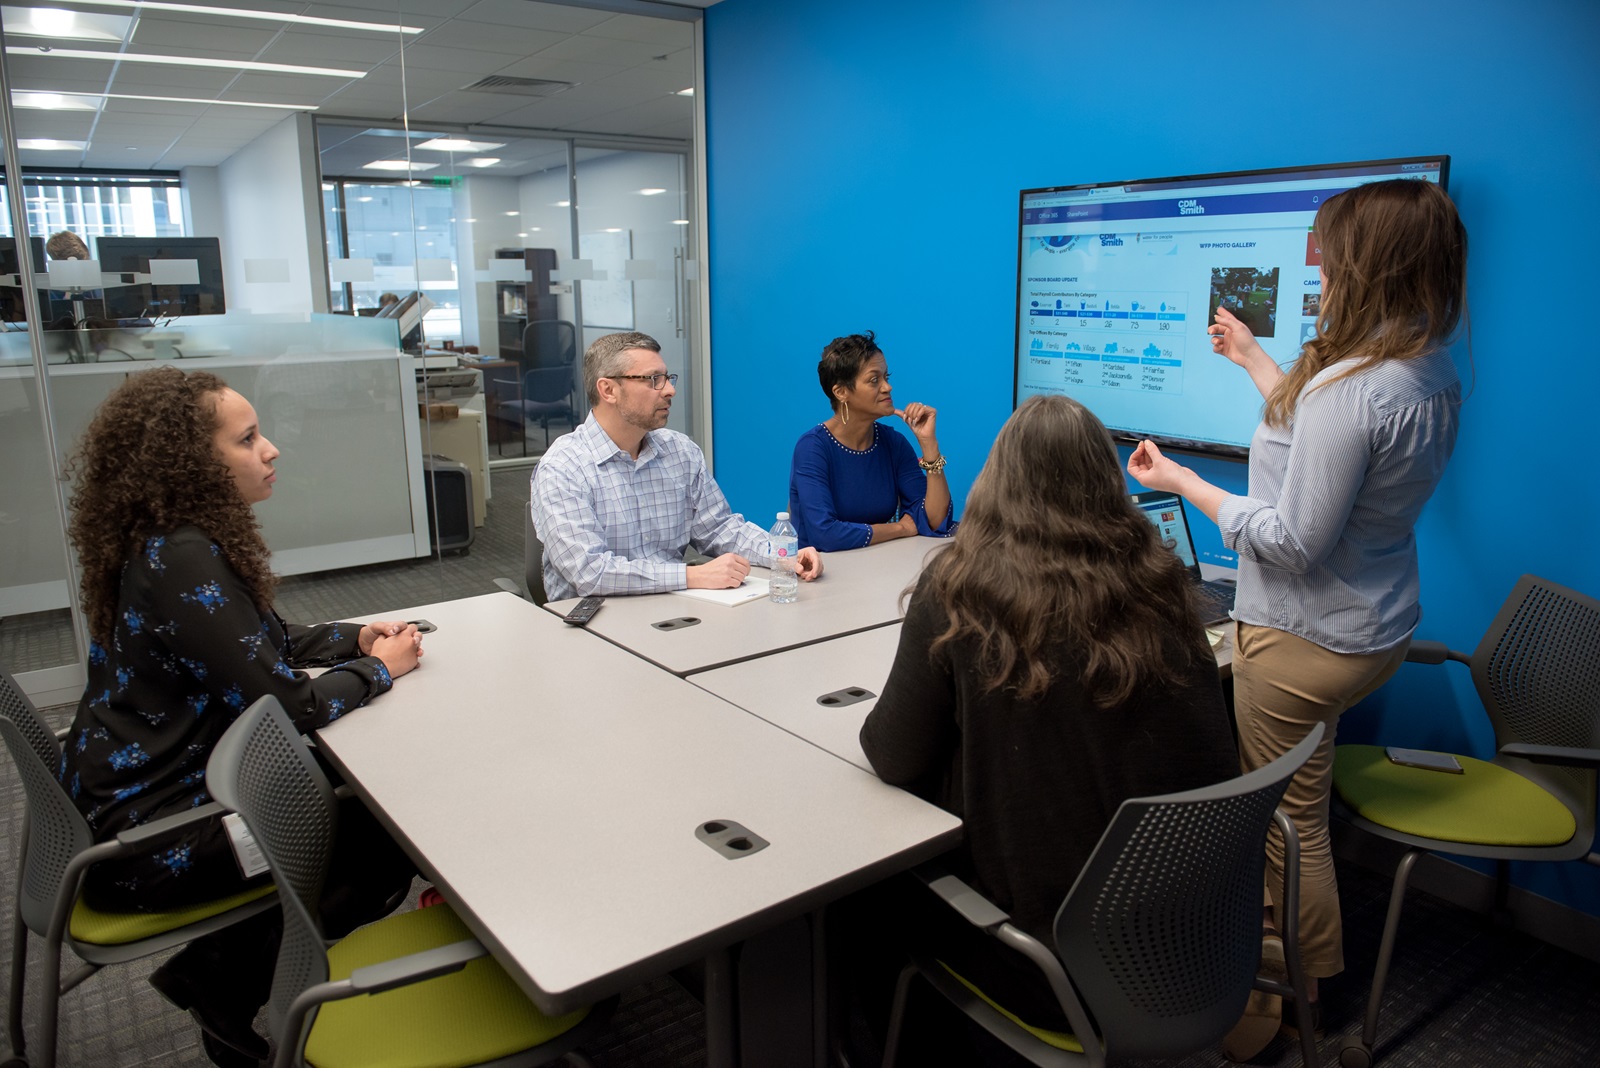 Employees gathered around a conference table and bring diverse perspectives to a meeting.